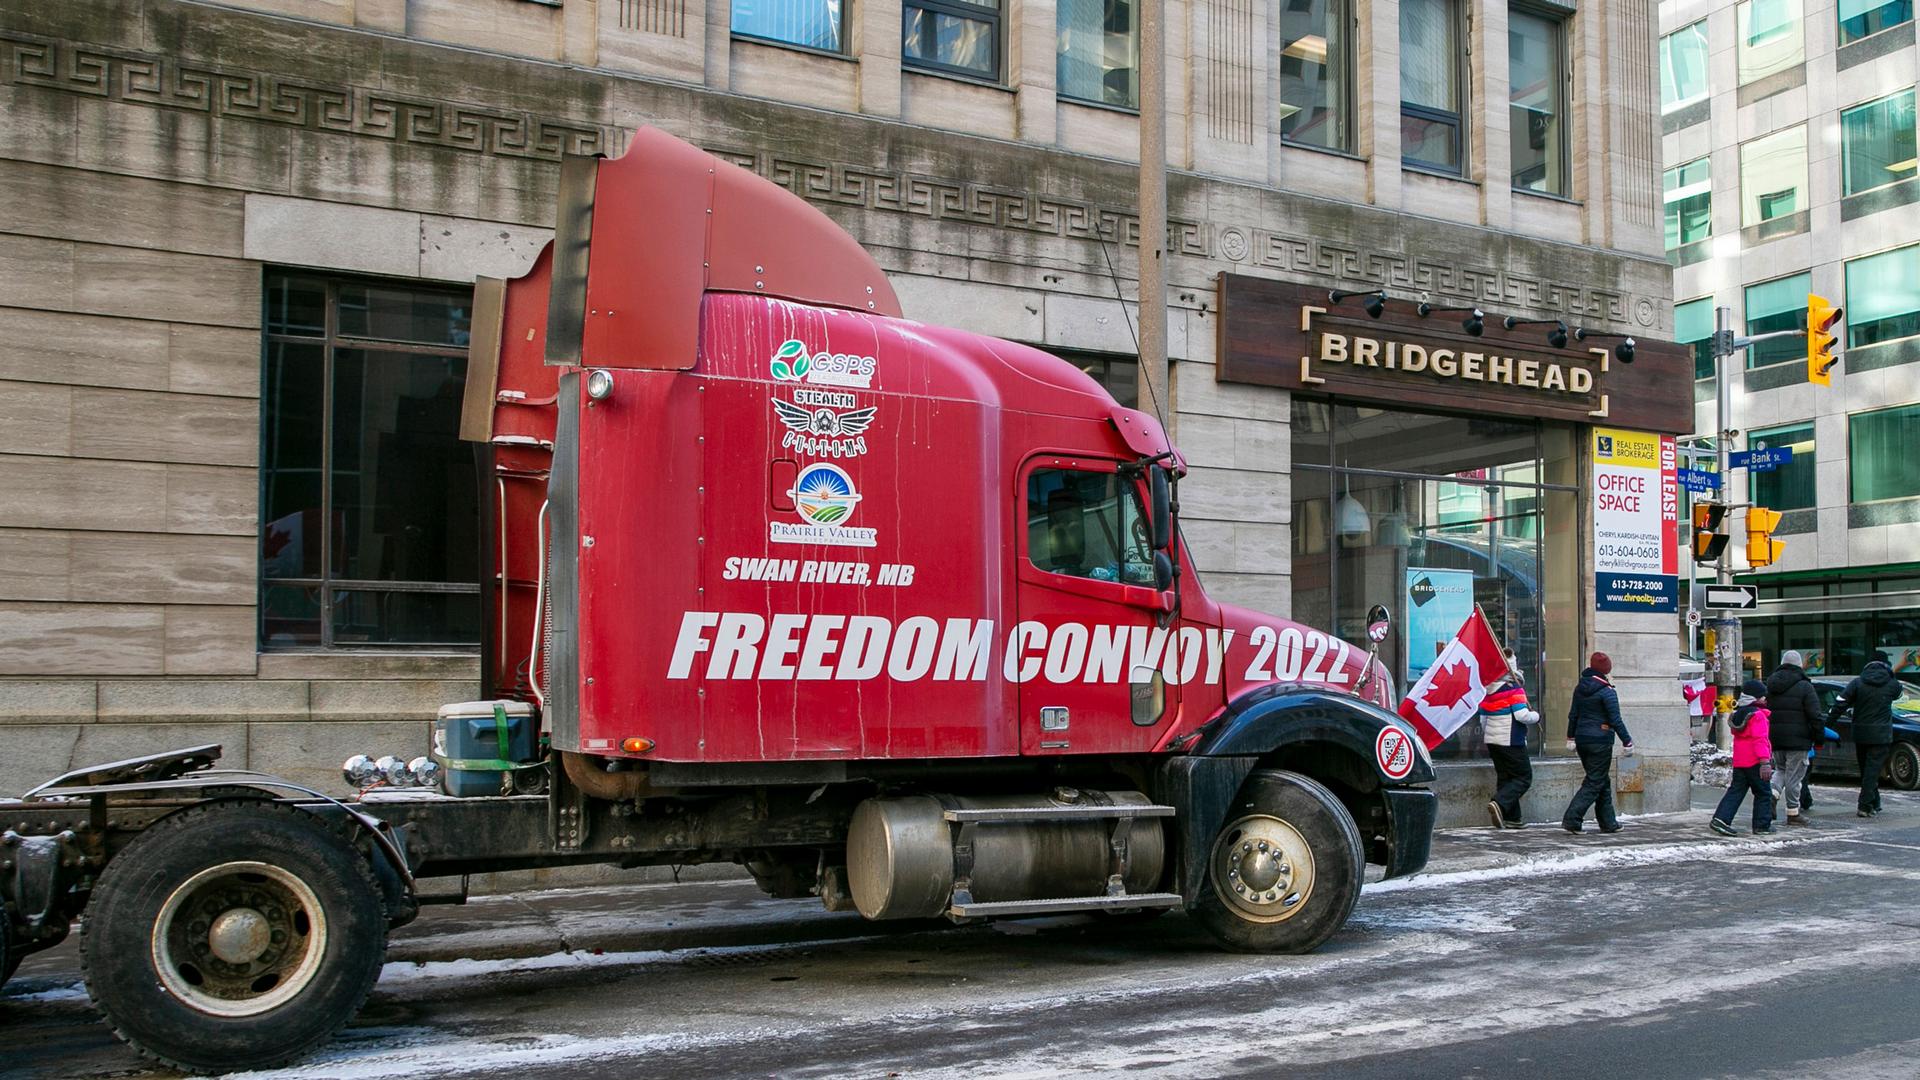 The words "Freedom Convoy 2022" are visible on a truck that is part of a demonstration against COVID-19 restrictions in Ottawa, Ontario, Canada, on Sunday, Feb. 13, 2022. 